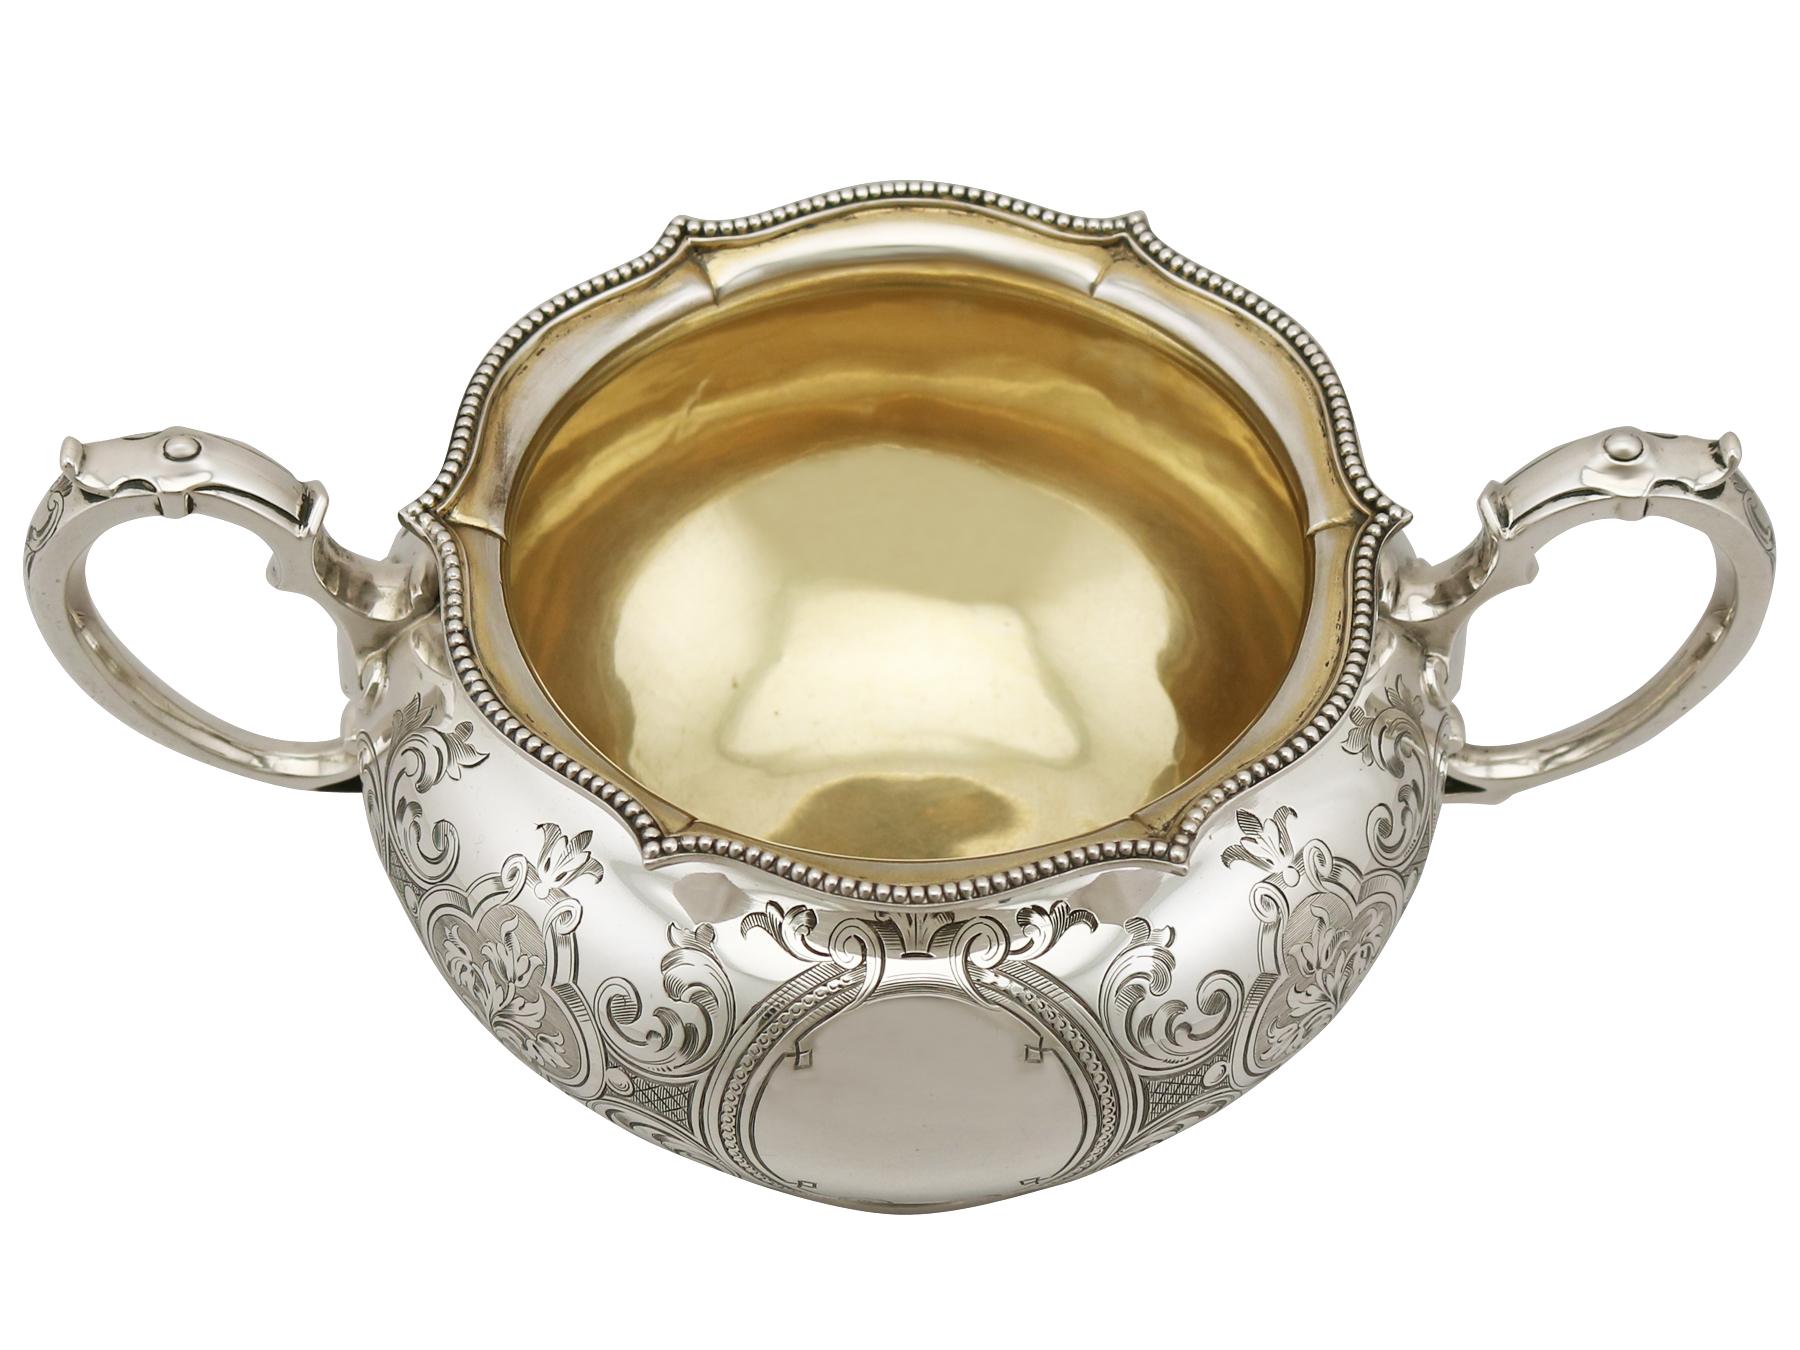 An exceptional, fine and impressive antique Victorian English sterling silver sugar bowl; an addition to our silver teaware collection.

This exceptional Victorian silver sugar bowl, in sterling standard, has a circular rounded form.

The body